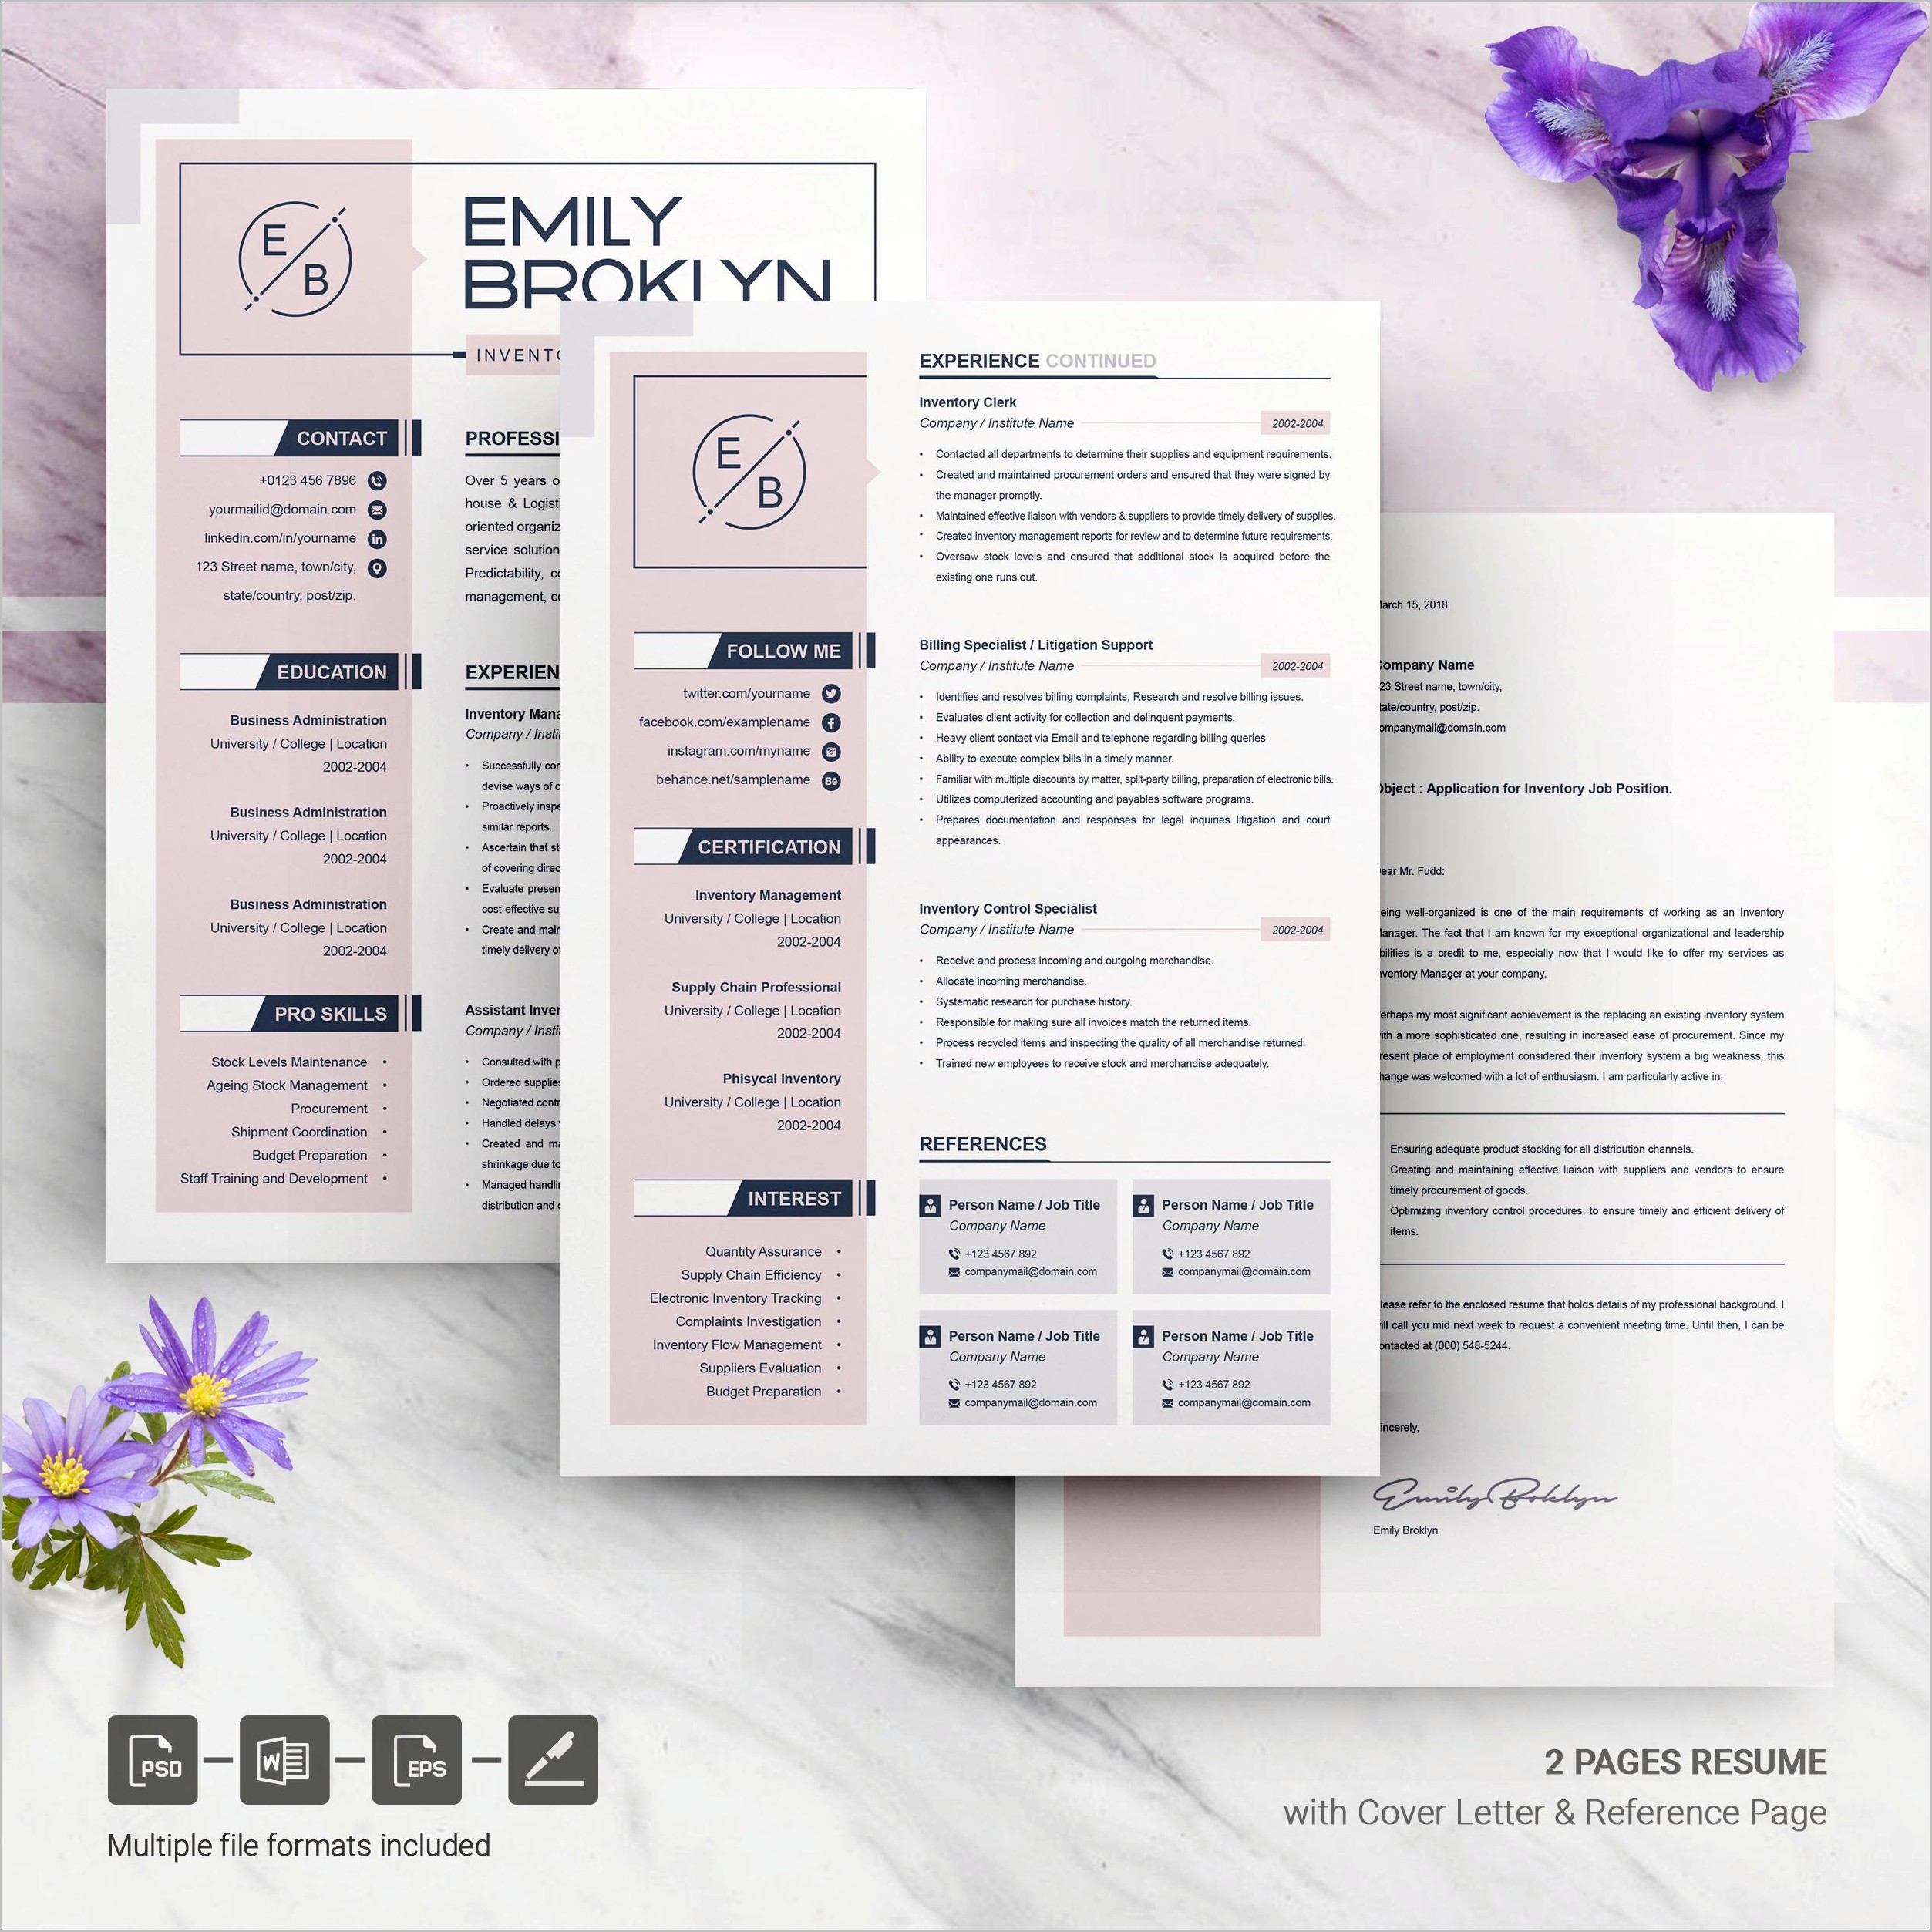 Is Free Resumes A Legit Resume Template Company